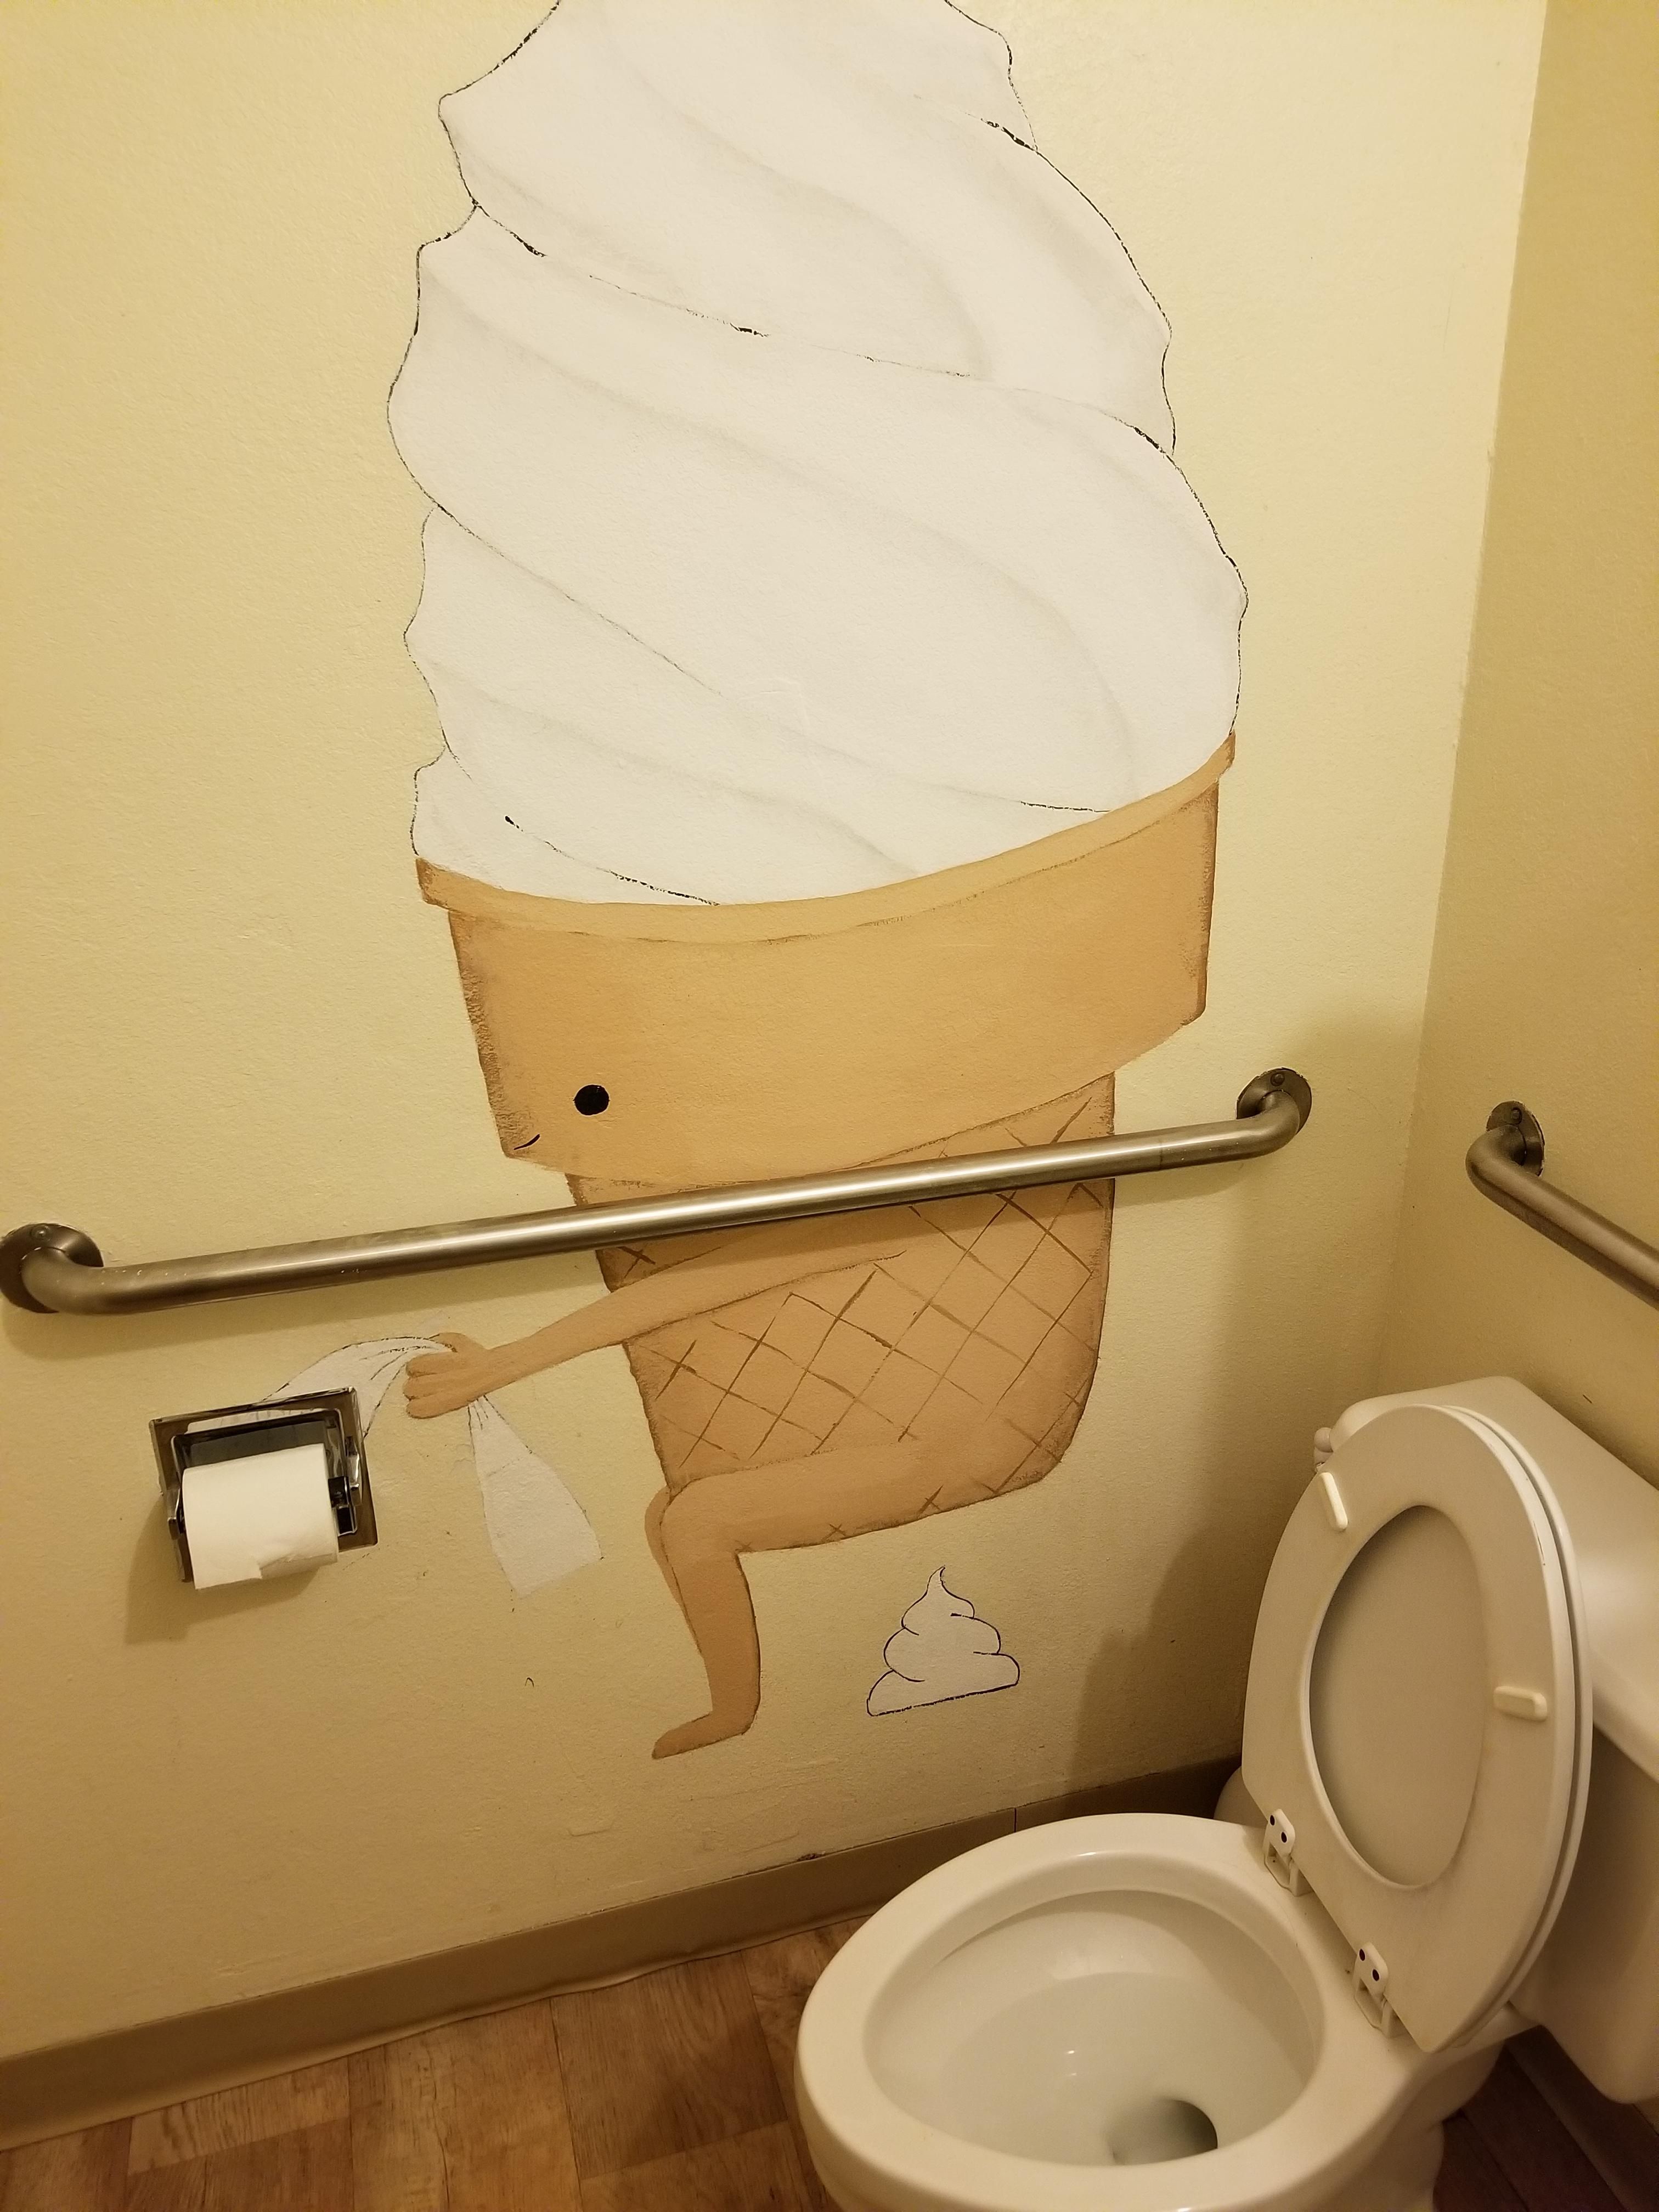 This mural in a local ice cream store bathroom...